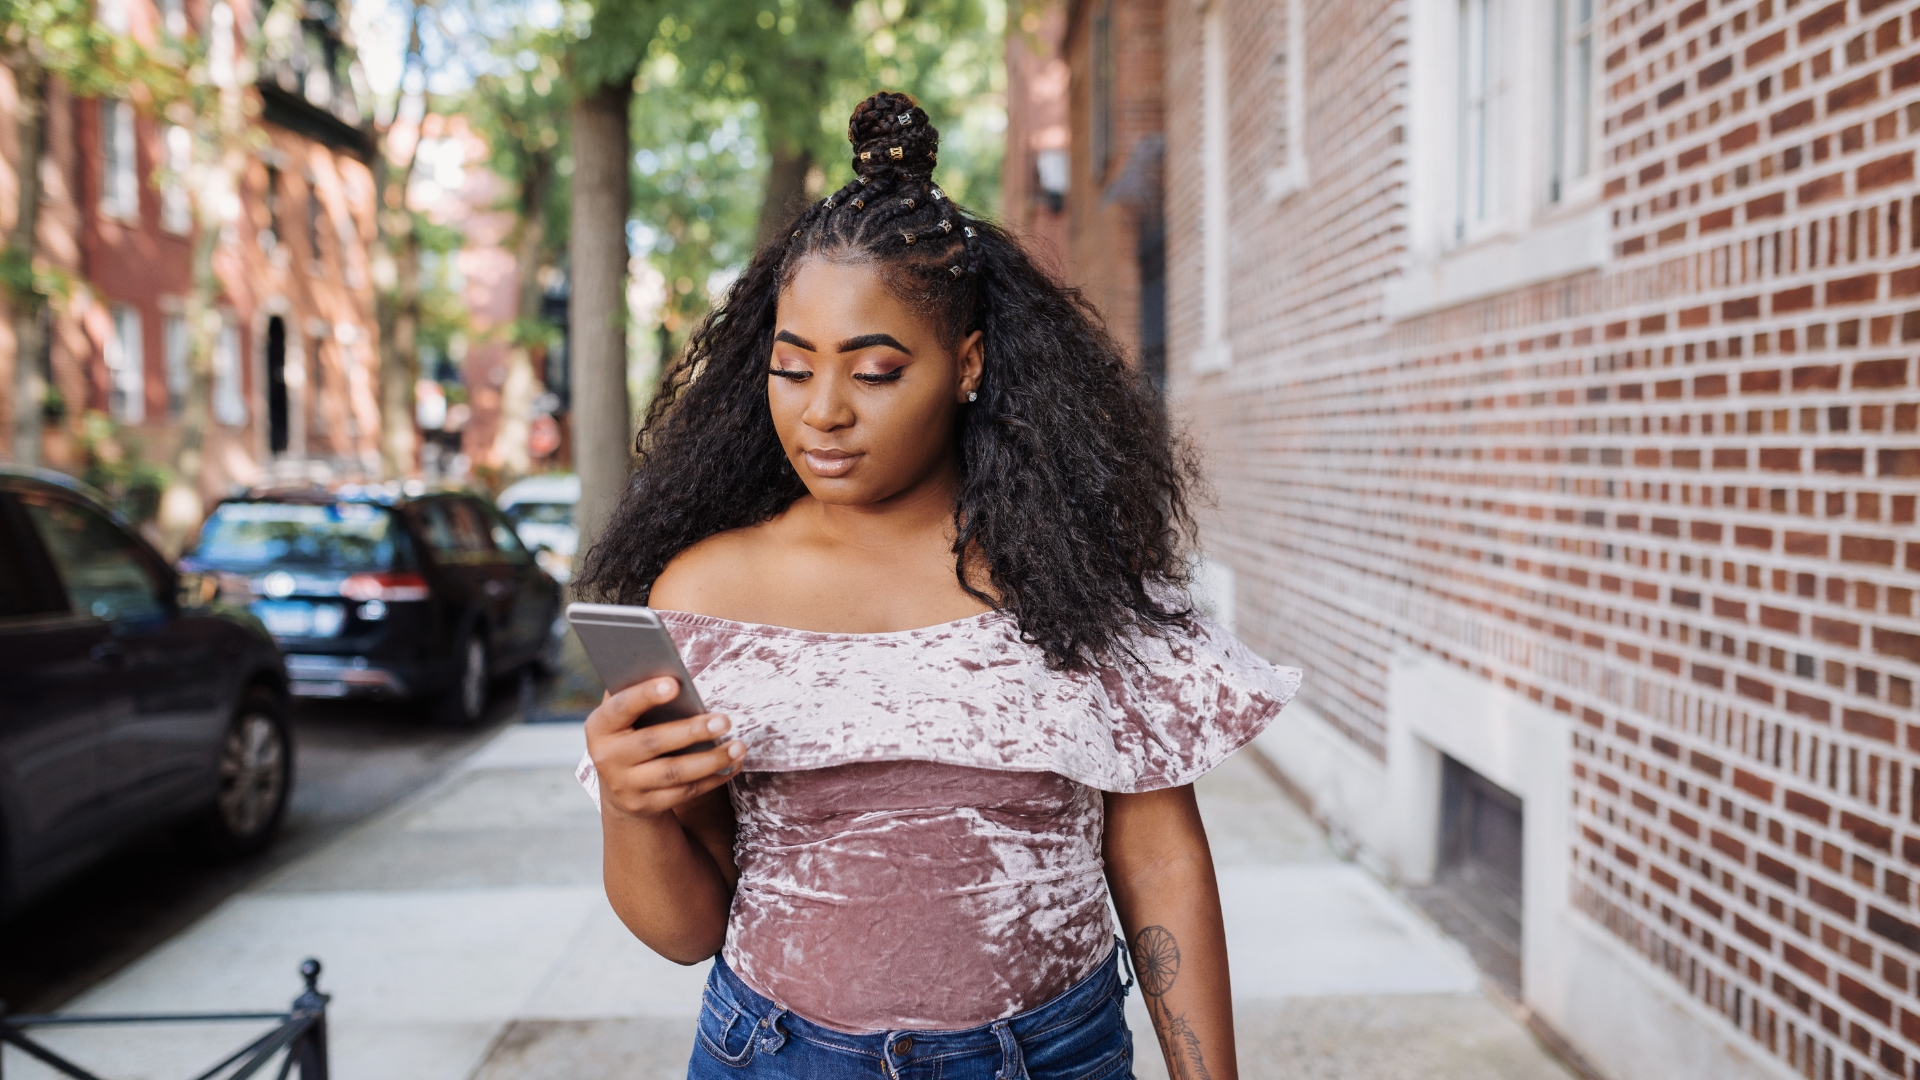 African American Gen Z young woman with curly hair and a velvet halter top looking at her phone attentively